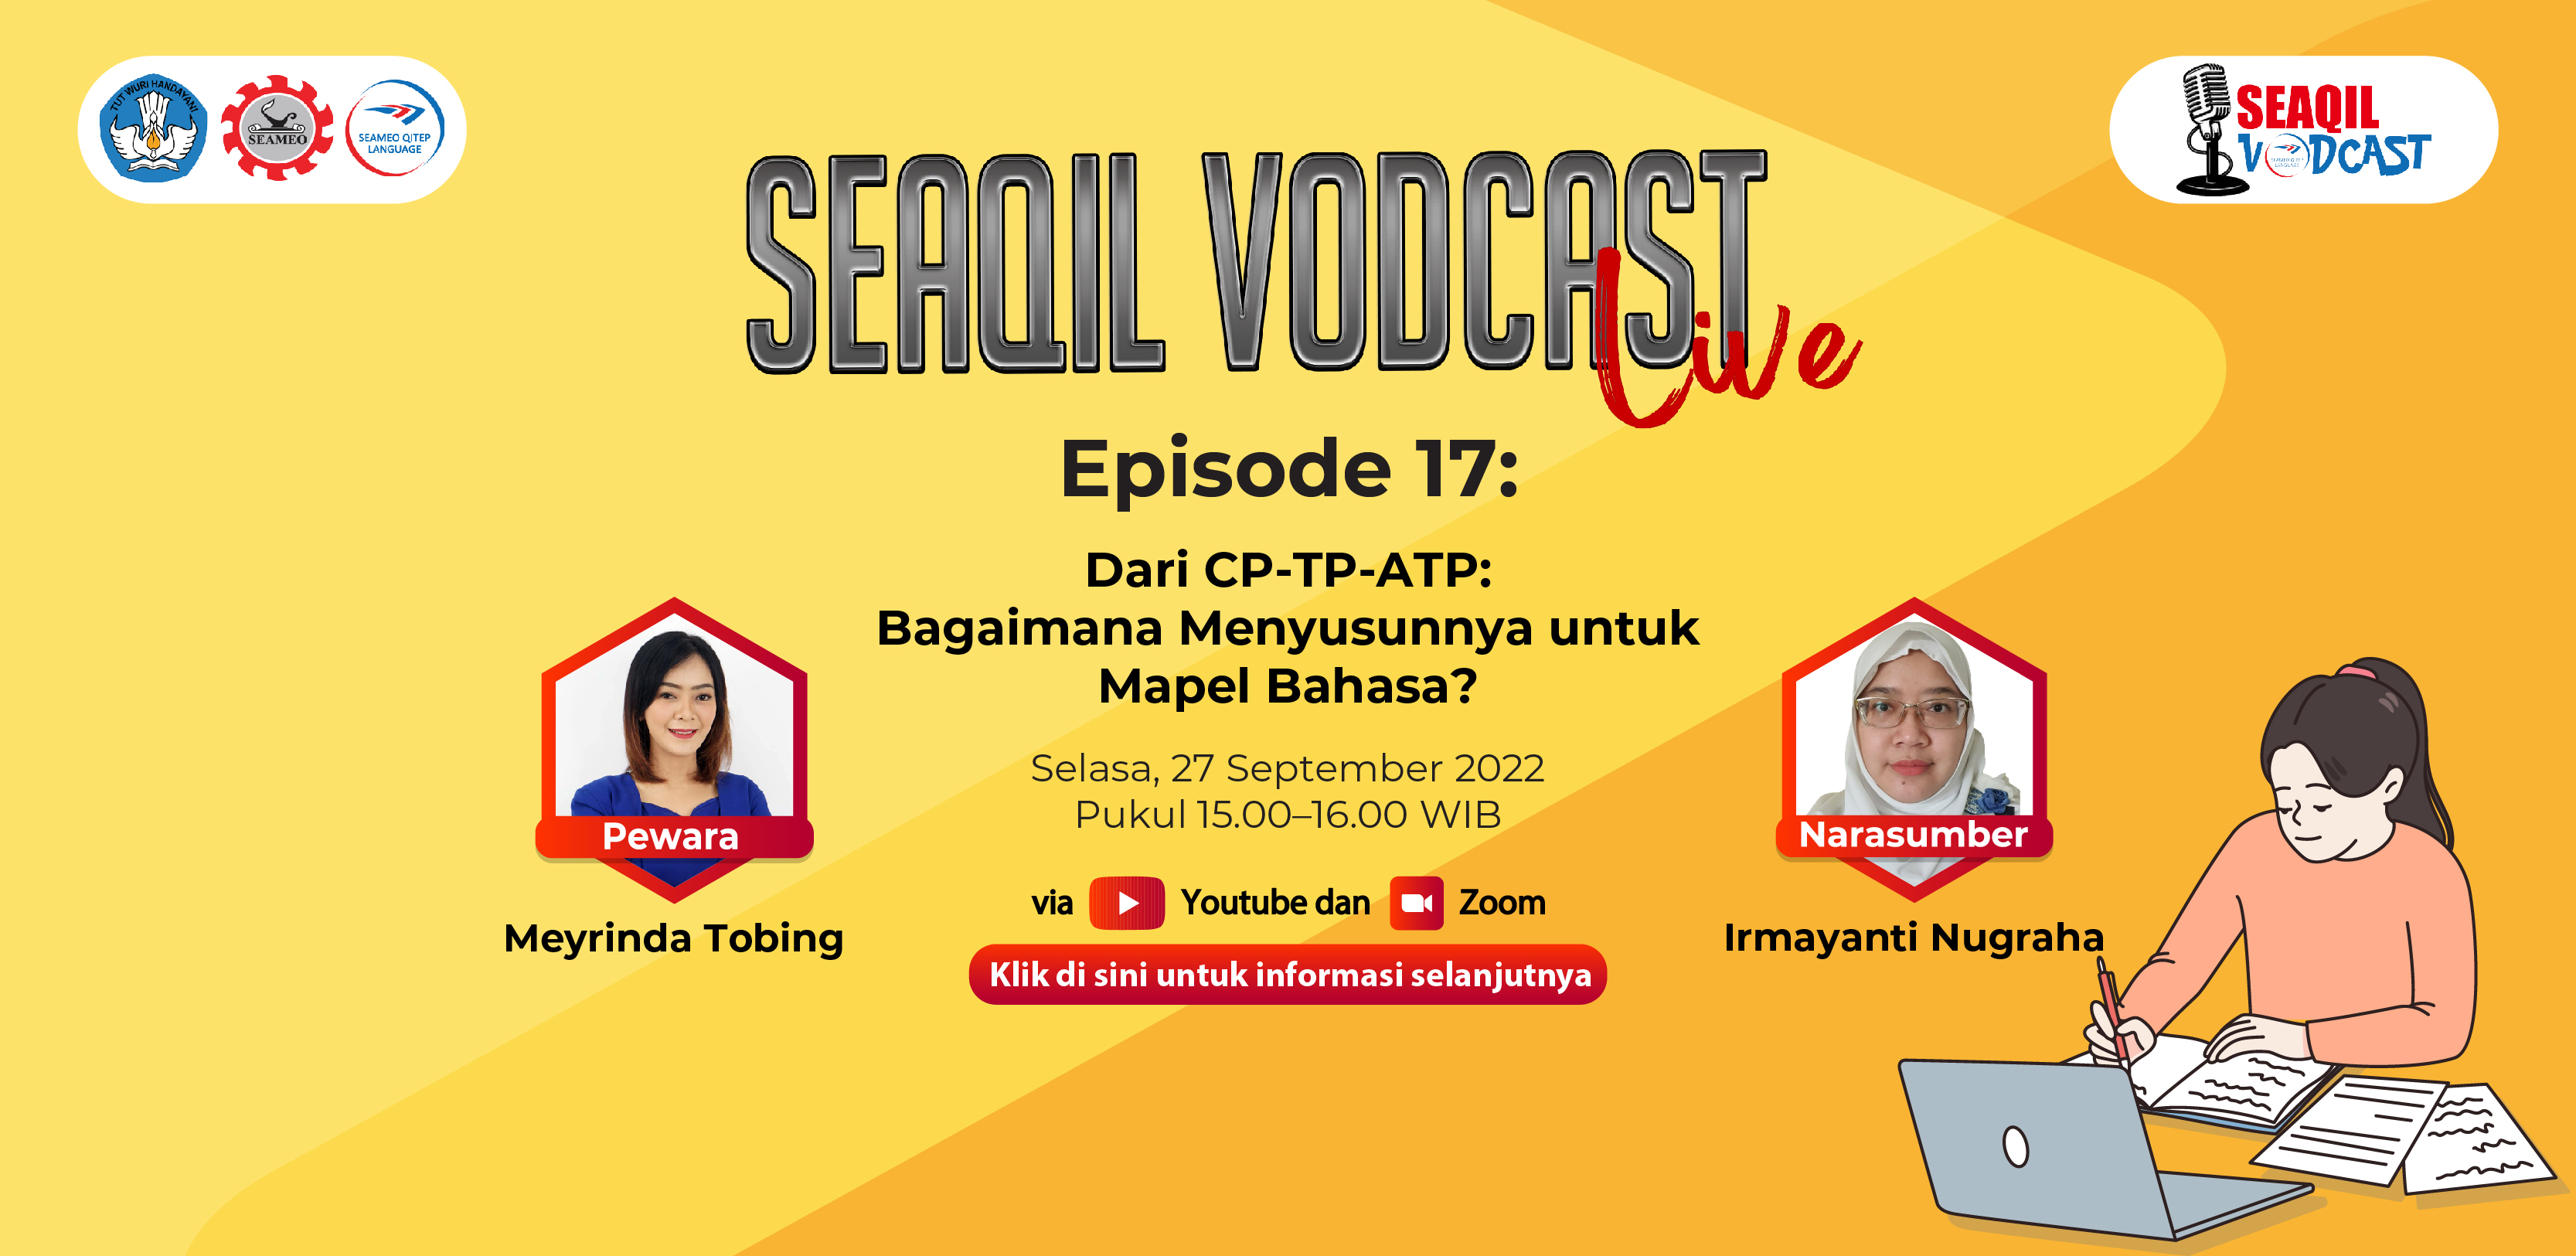 SEAQIL Vodcast Live Episode 17